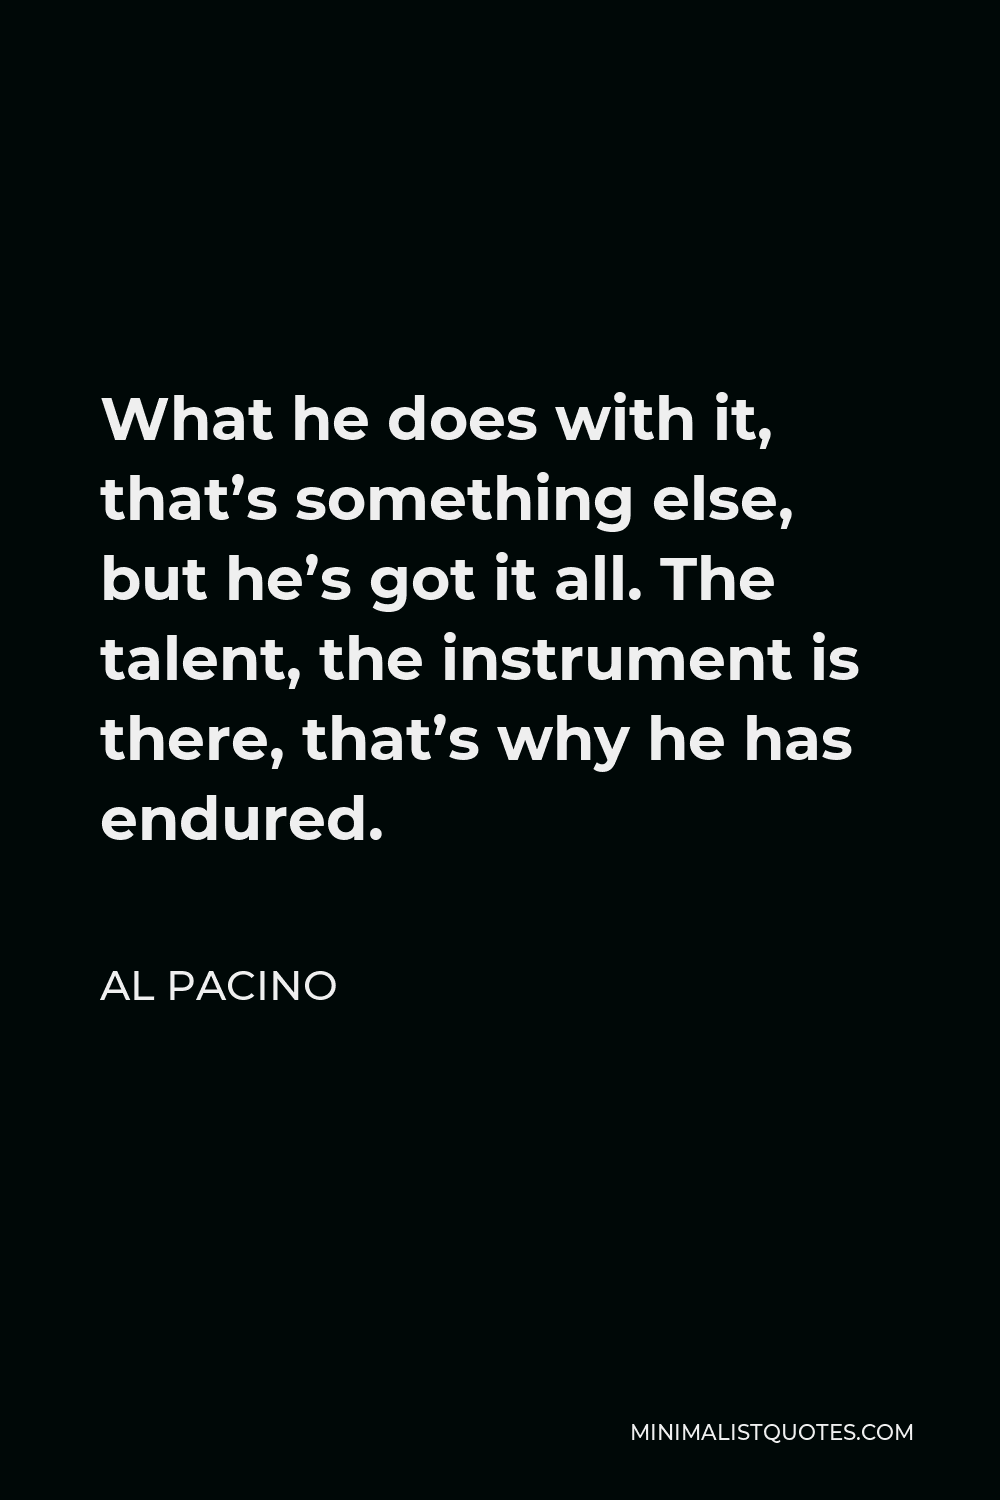 Al Pacino Quote - What he does with it, that’s something else, but he’s got it all. The talent, the instrument is there, that’s why he has endured.